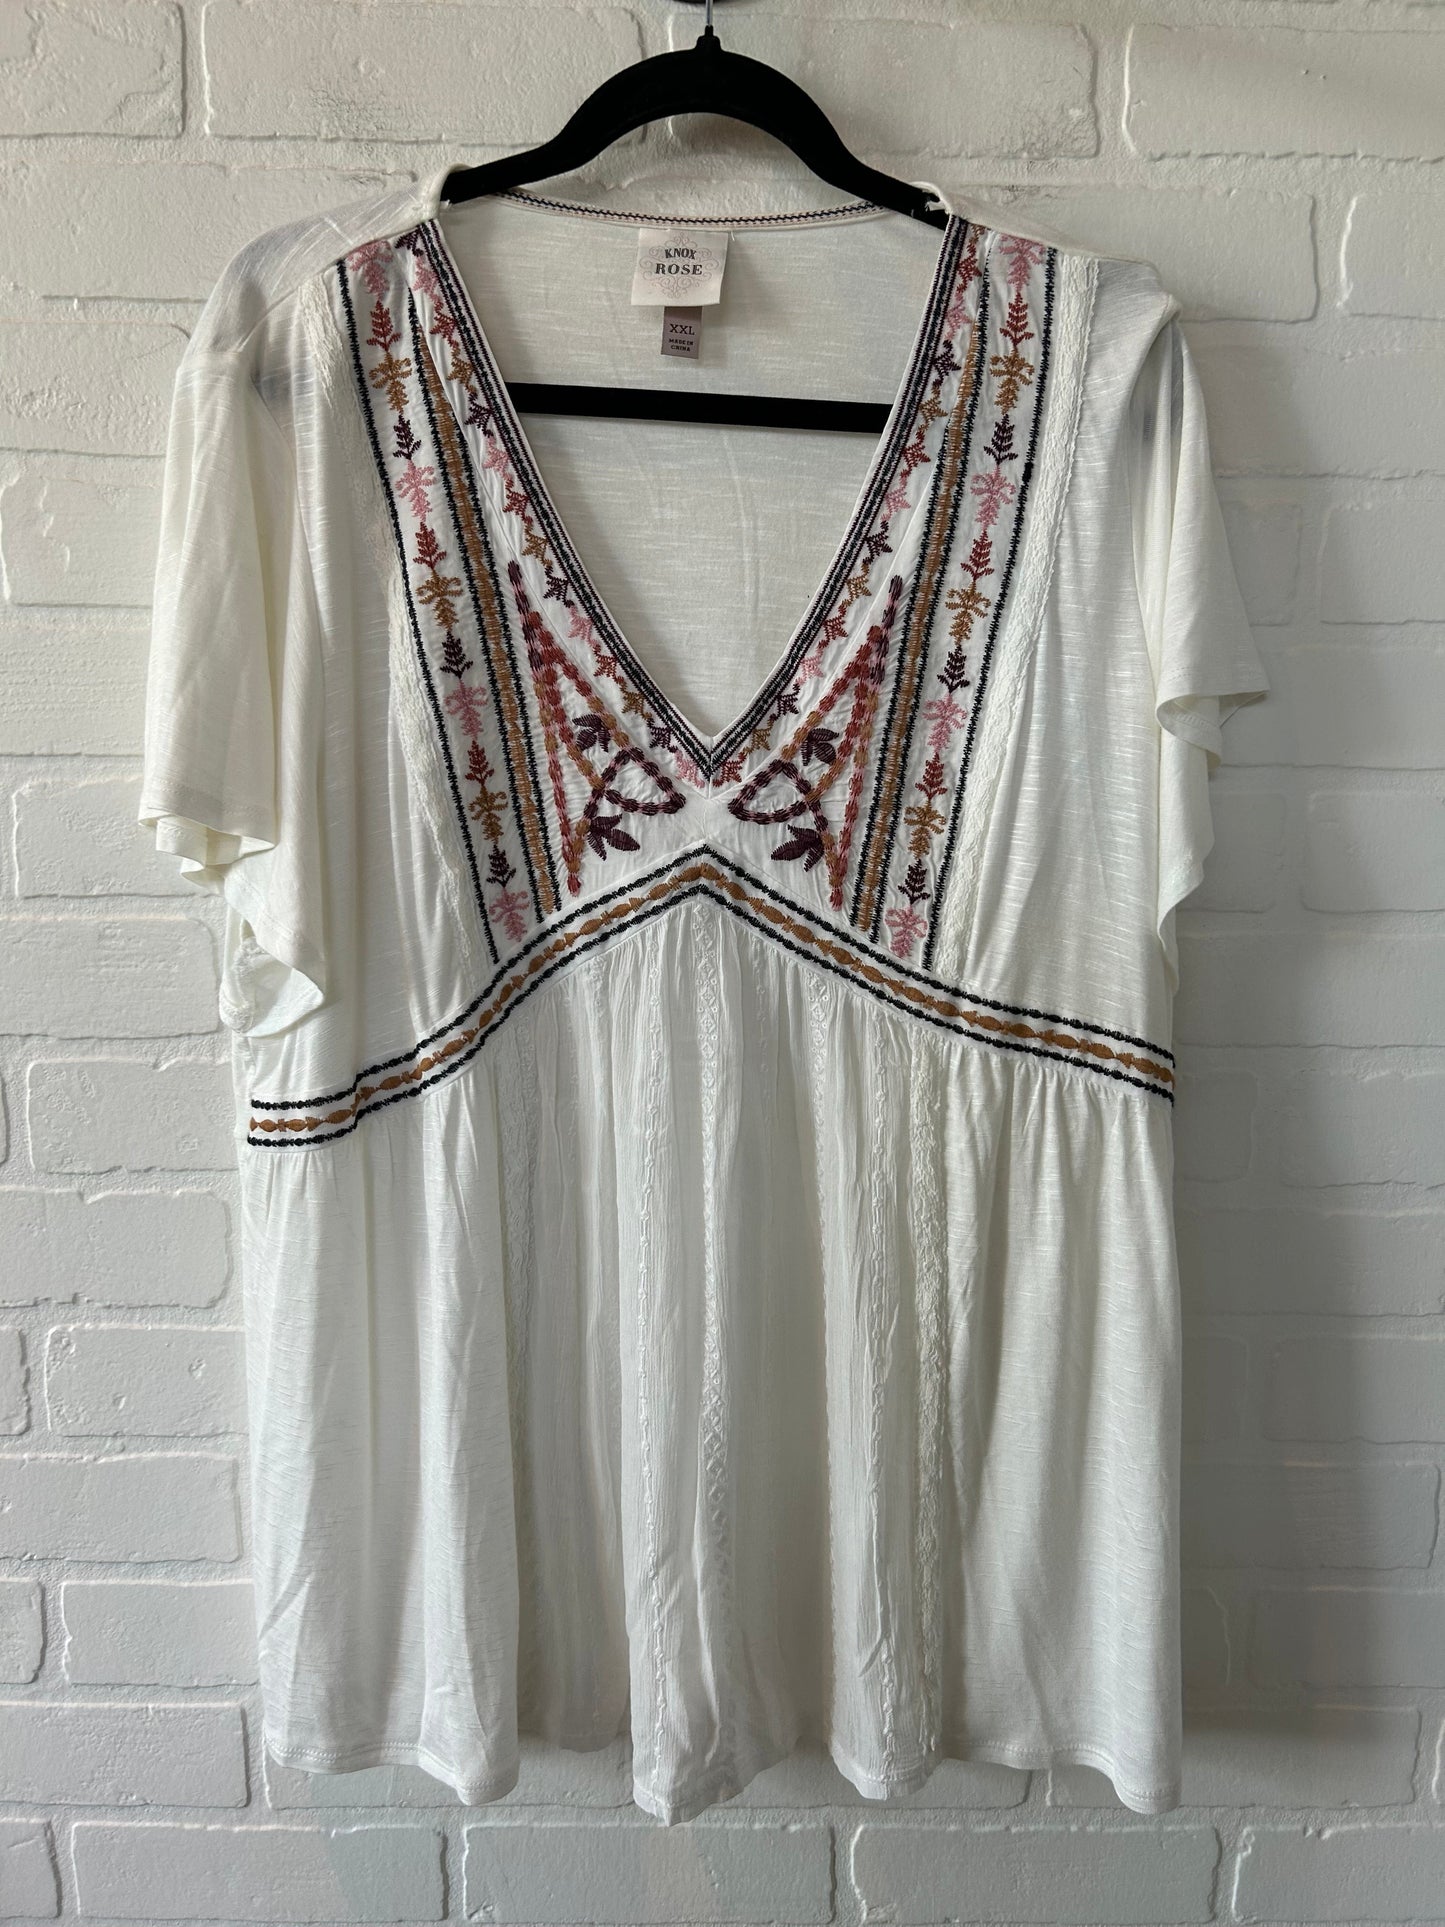 White Top Short Sleeve Knox Rose, Size 1x